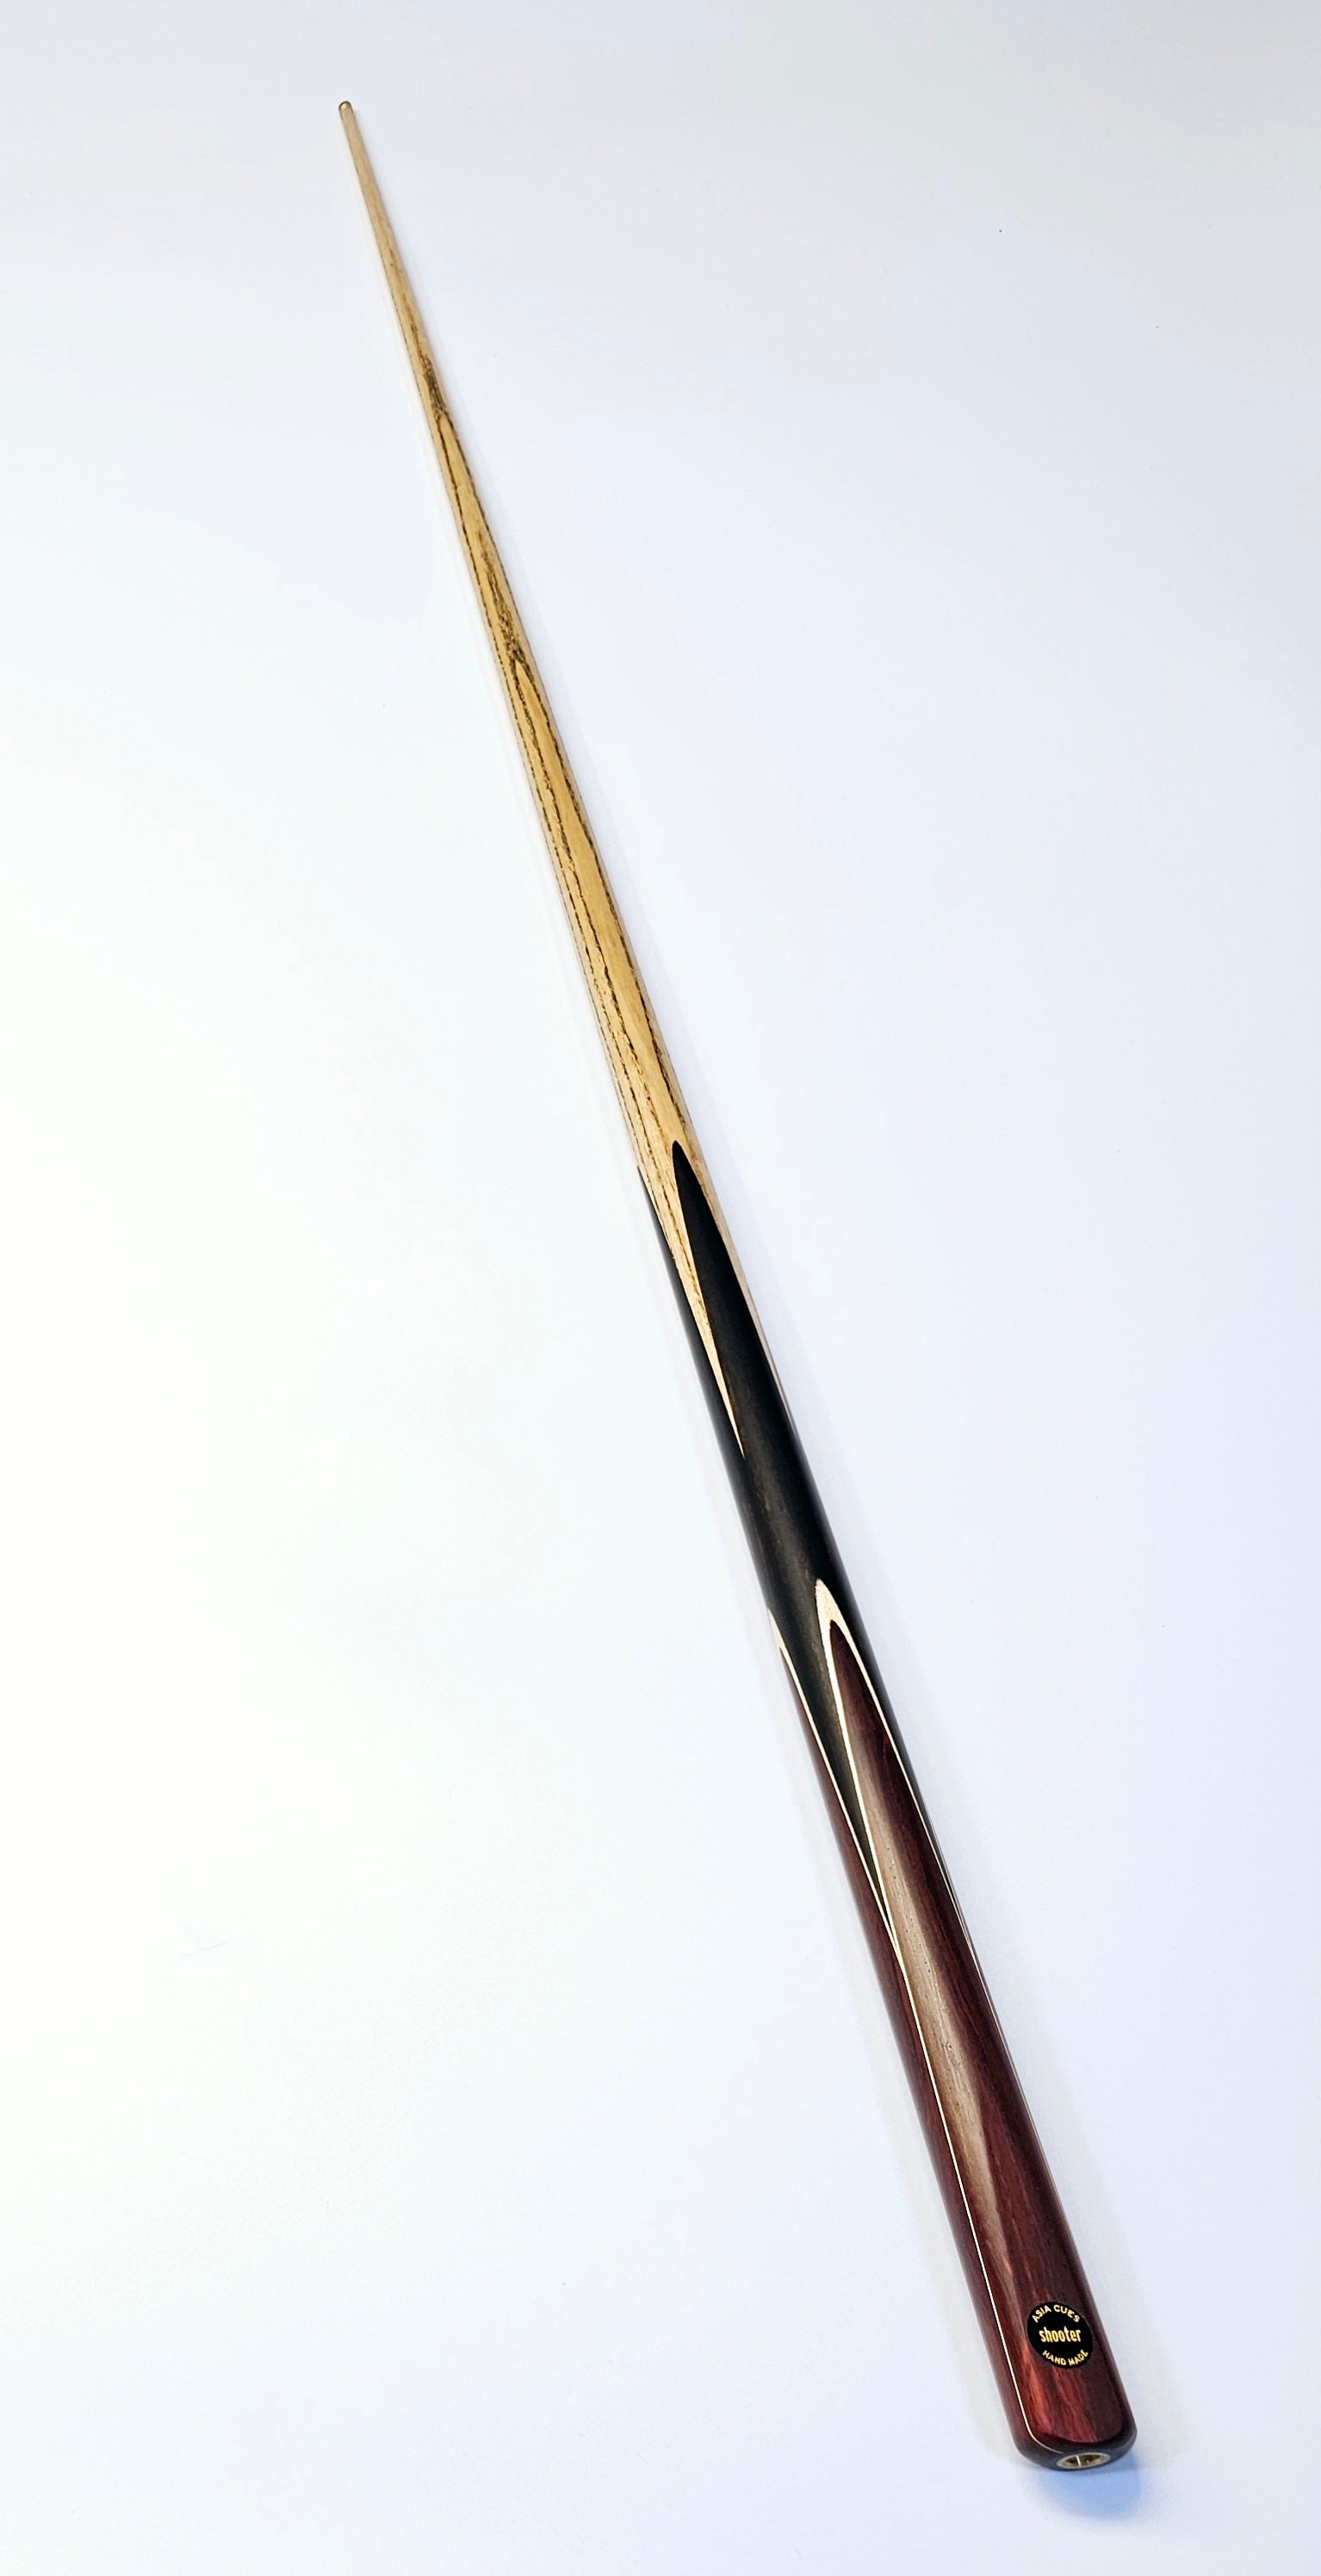 Asia Cues Shooter - One Piece Snooker Cue 9.7mm Tip, 18.6oz, 58"